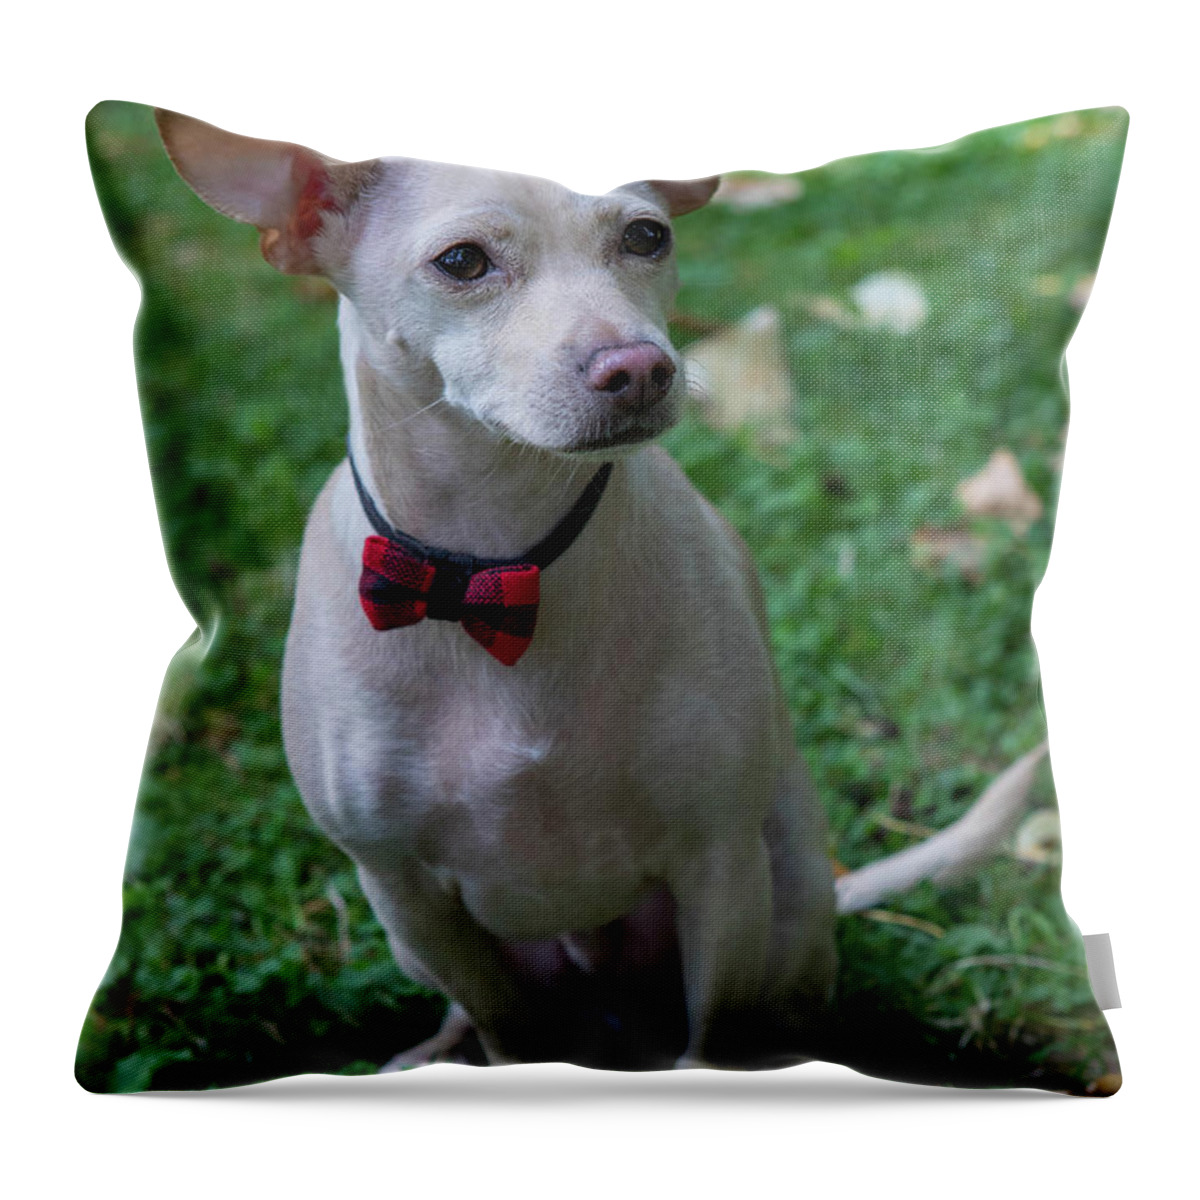 Ziggy Throw Pillow featuring the photograph Ziggy 2018 by Rebecca Cozart